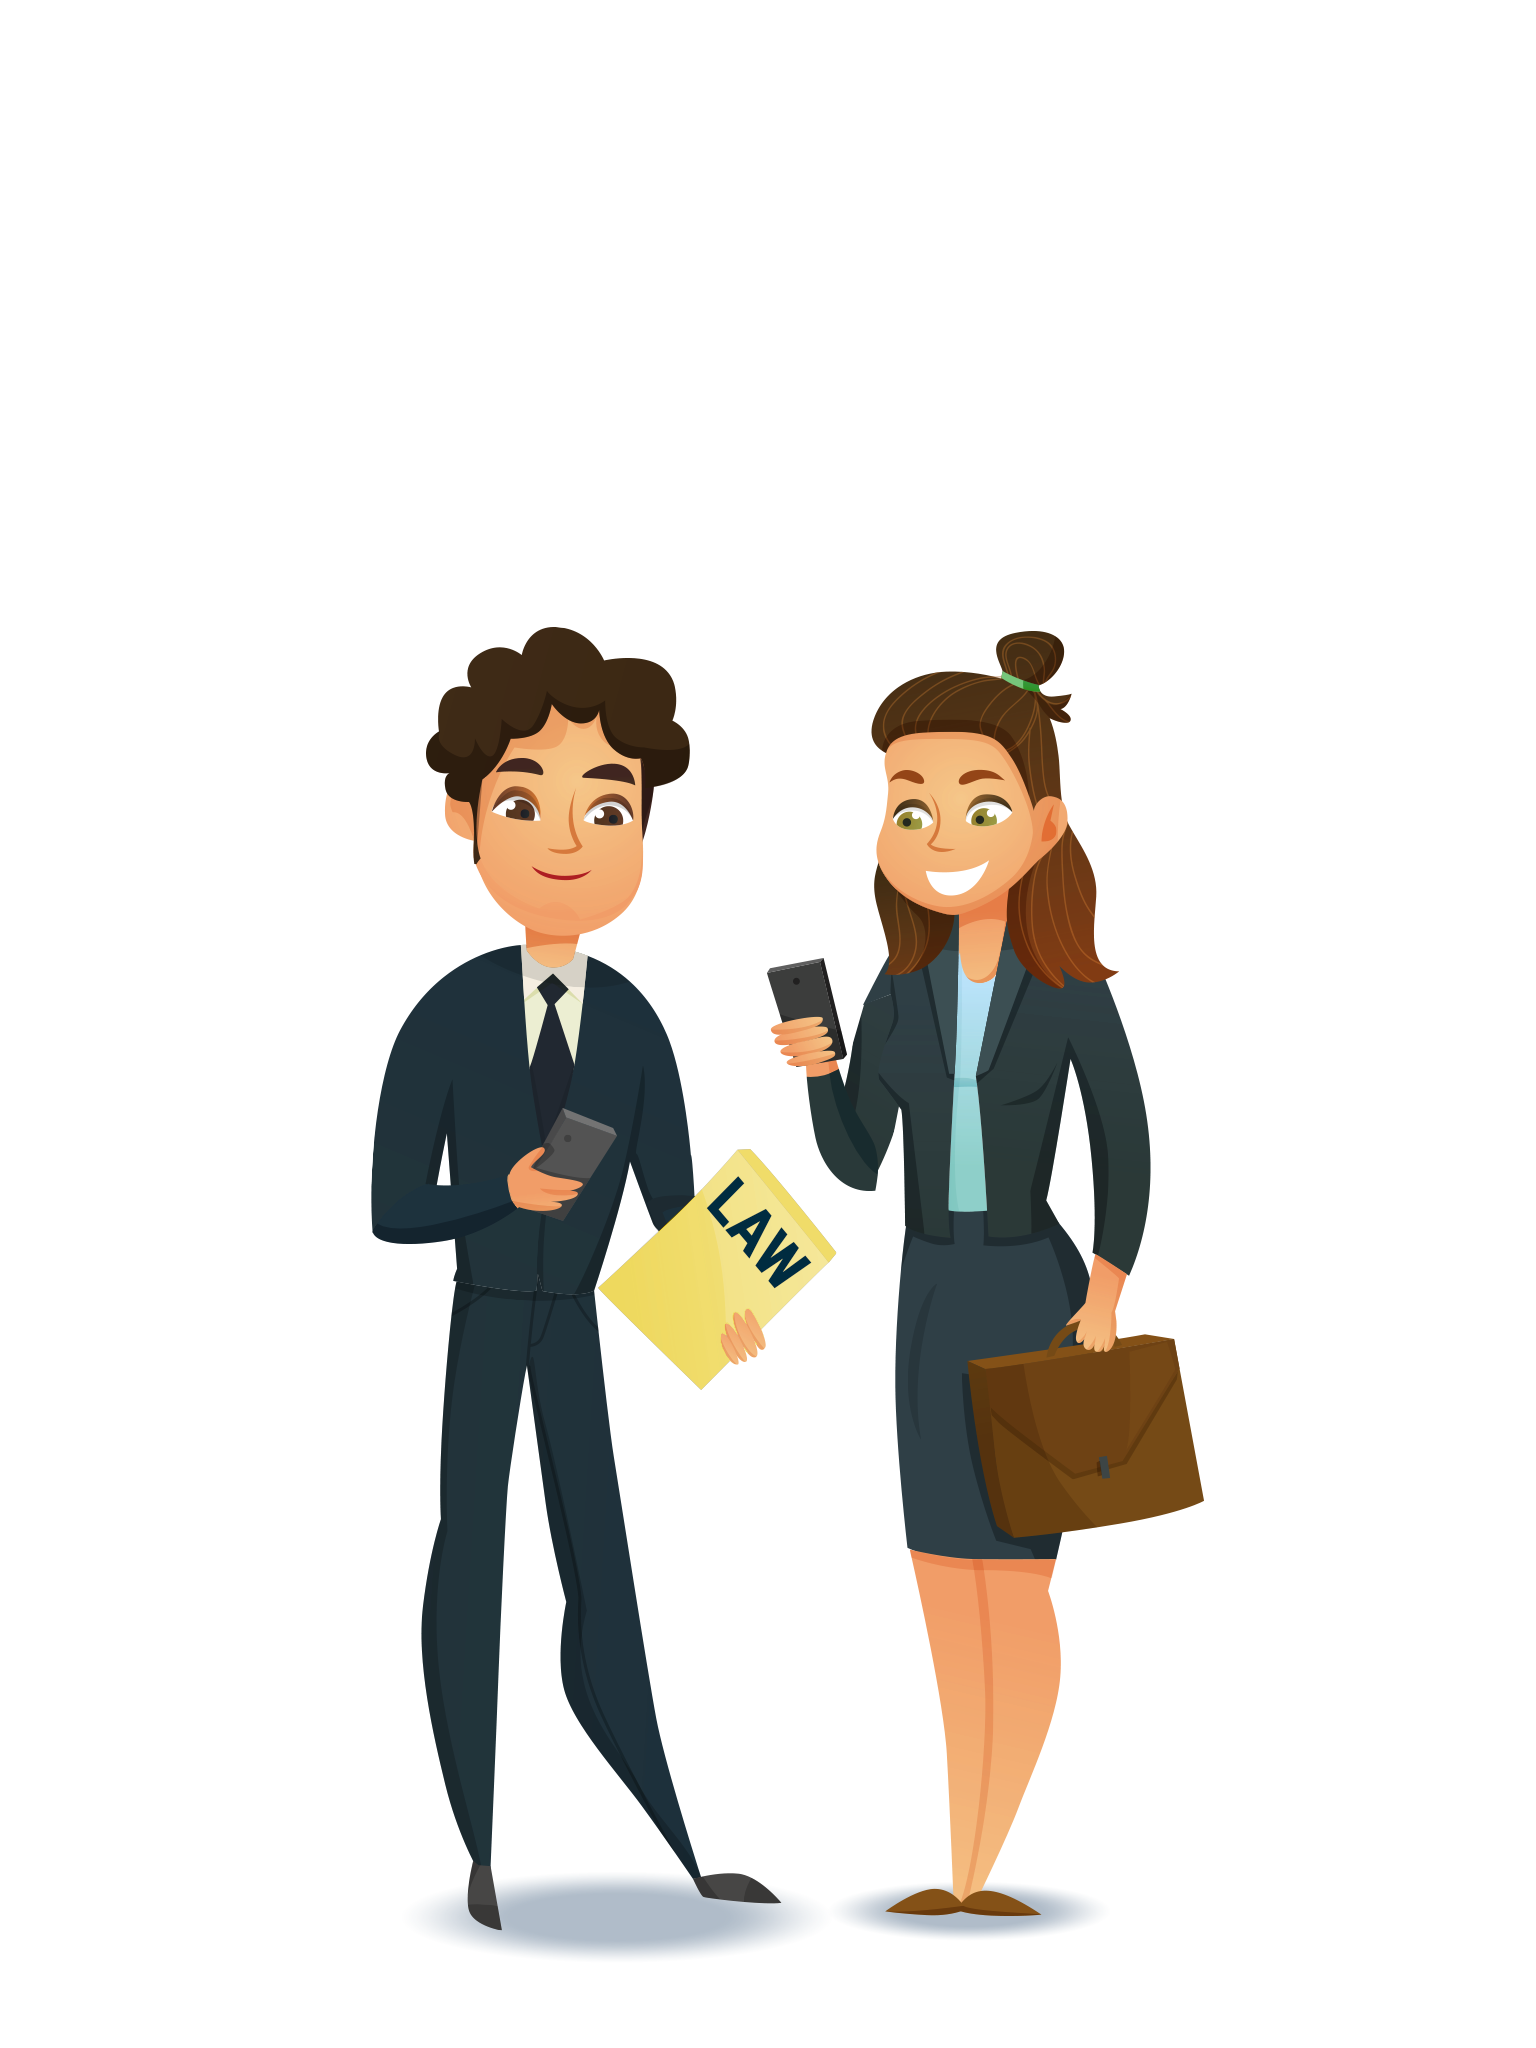 Barred app graphic